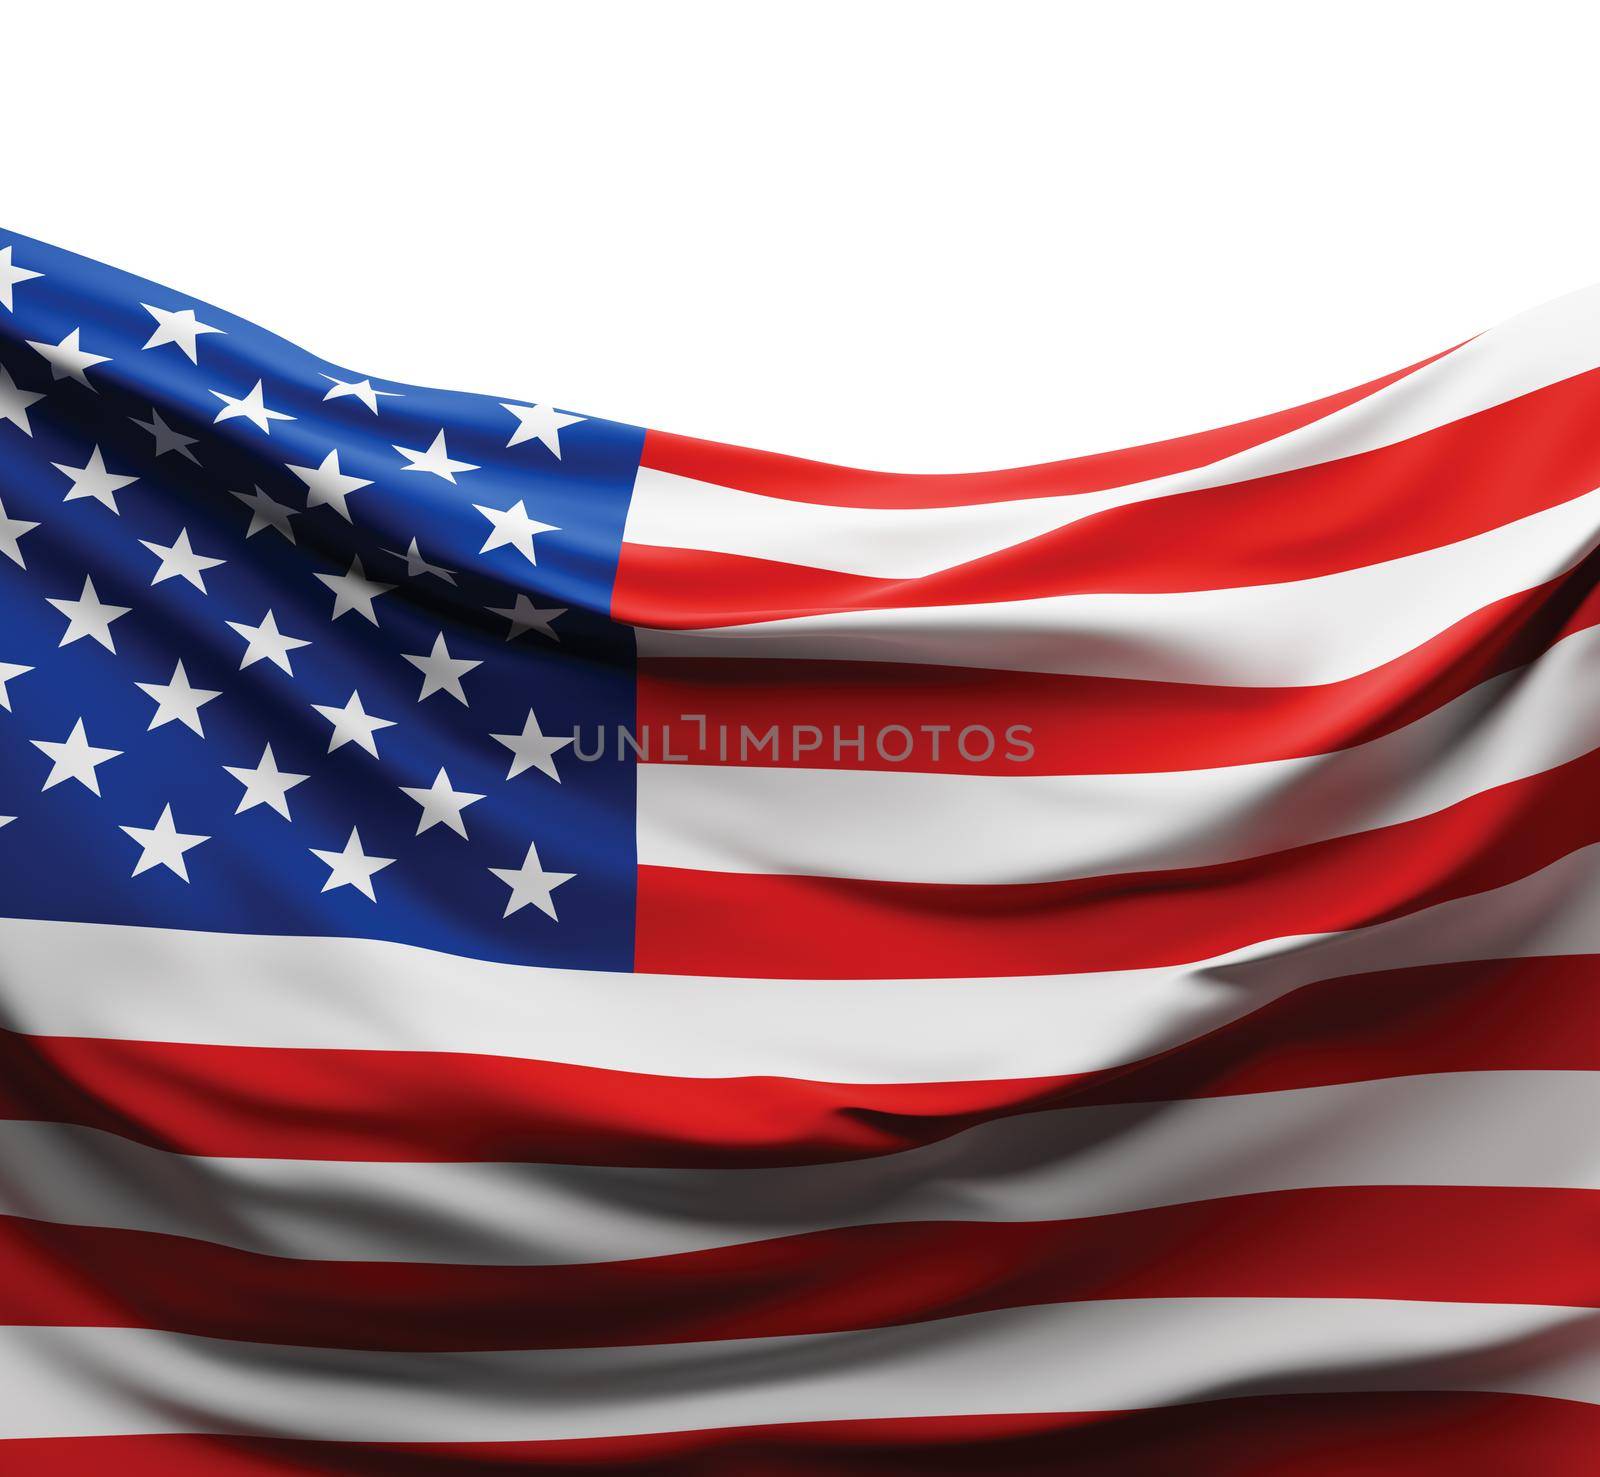 USA or American flag isolated on white background 3D render